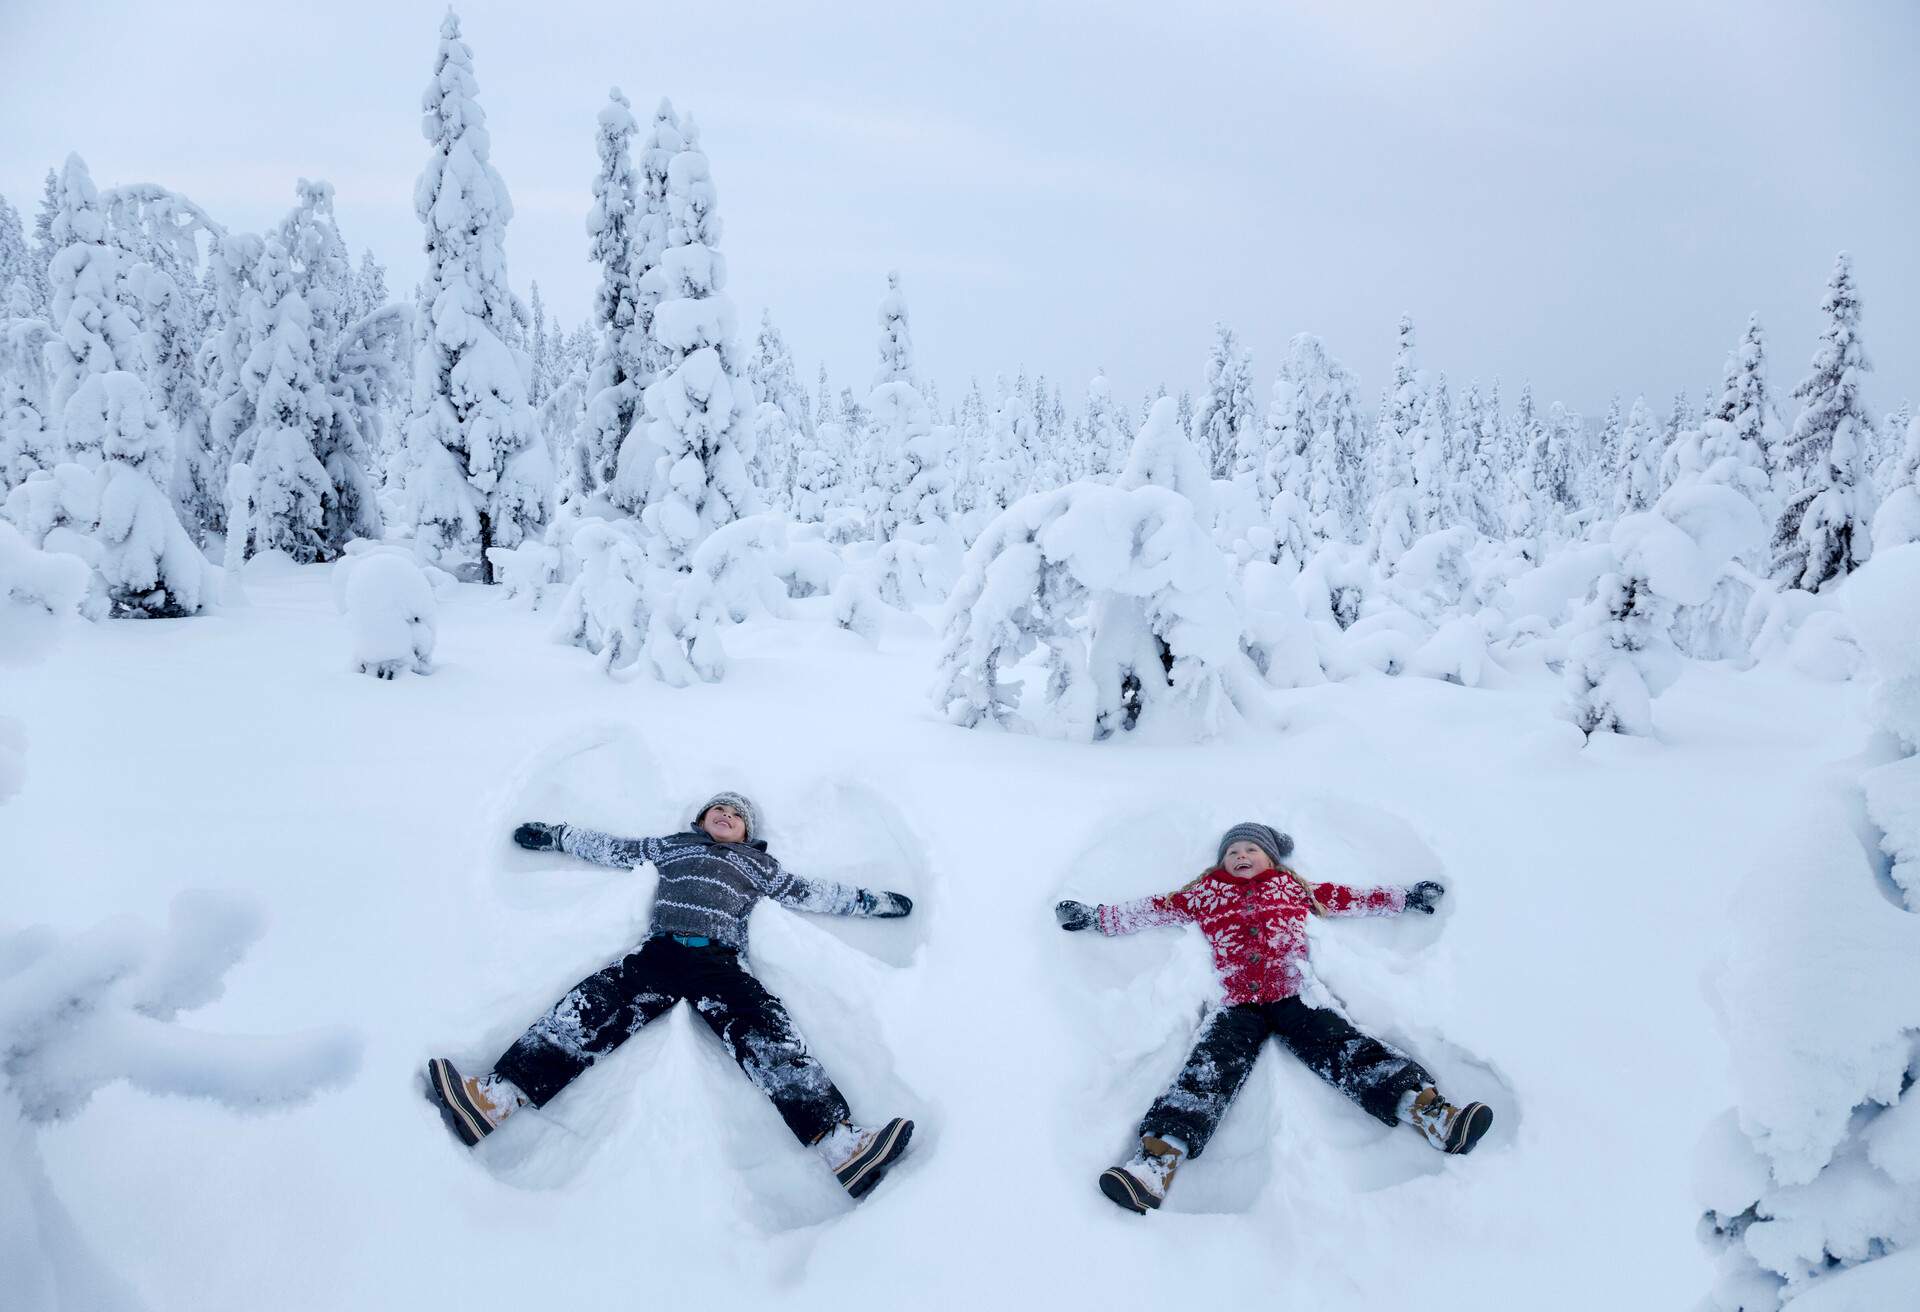 A YOUNG GIRL AND A YOUNG BOY MAKING SNOW ANGELS IN A SNOWY FOREST